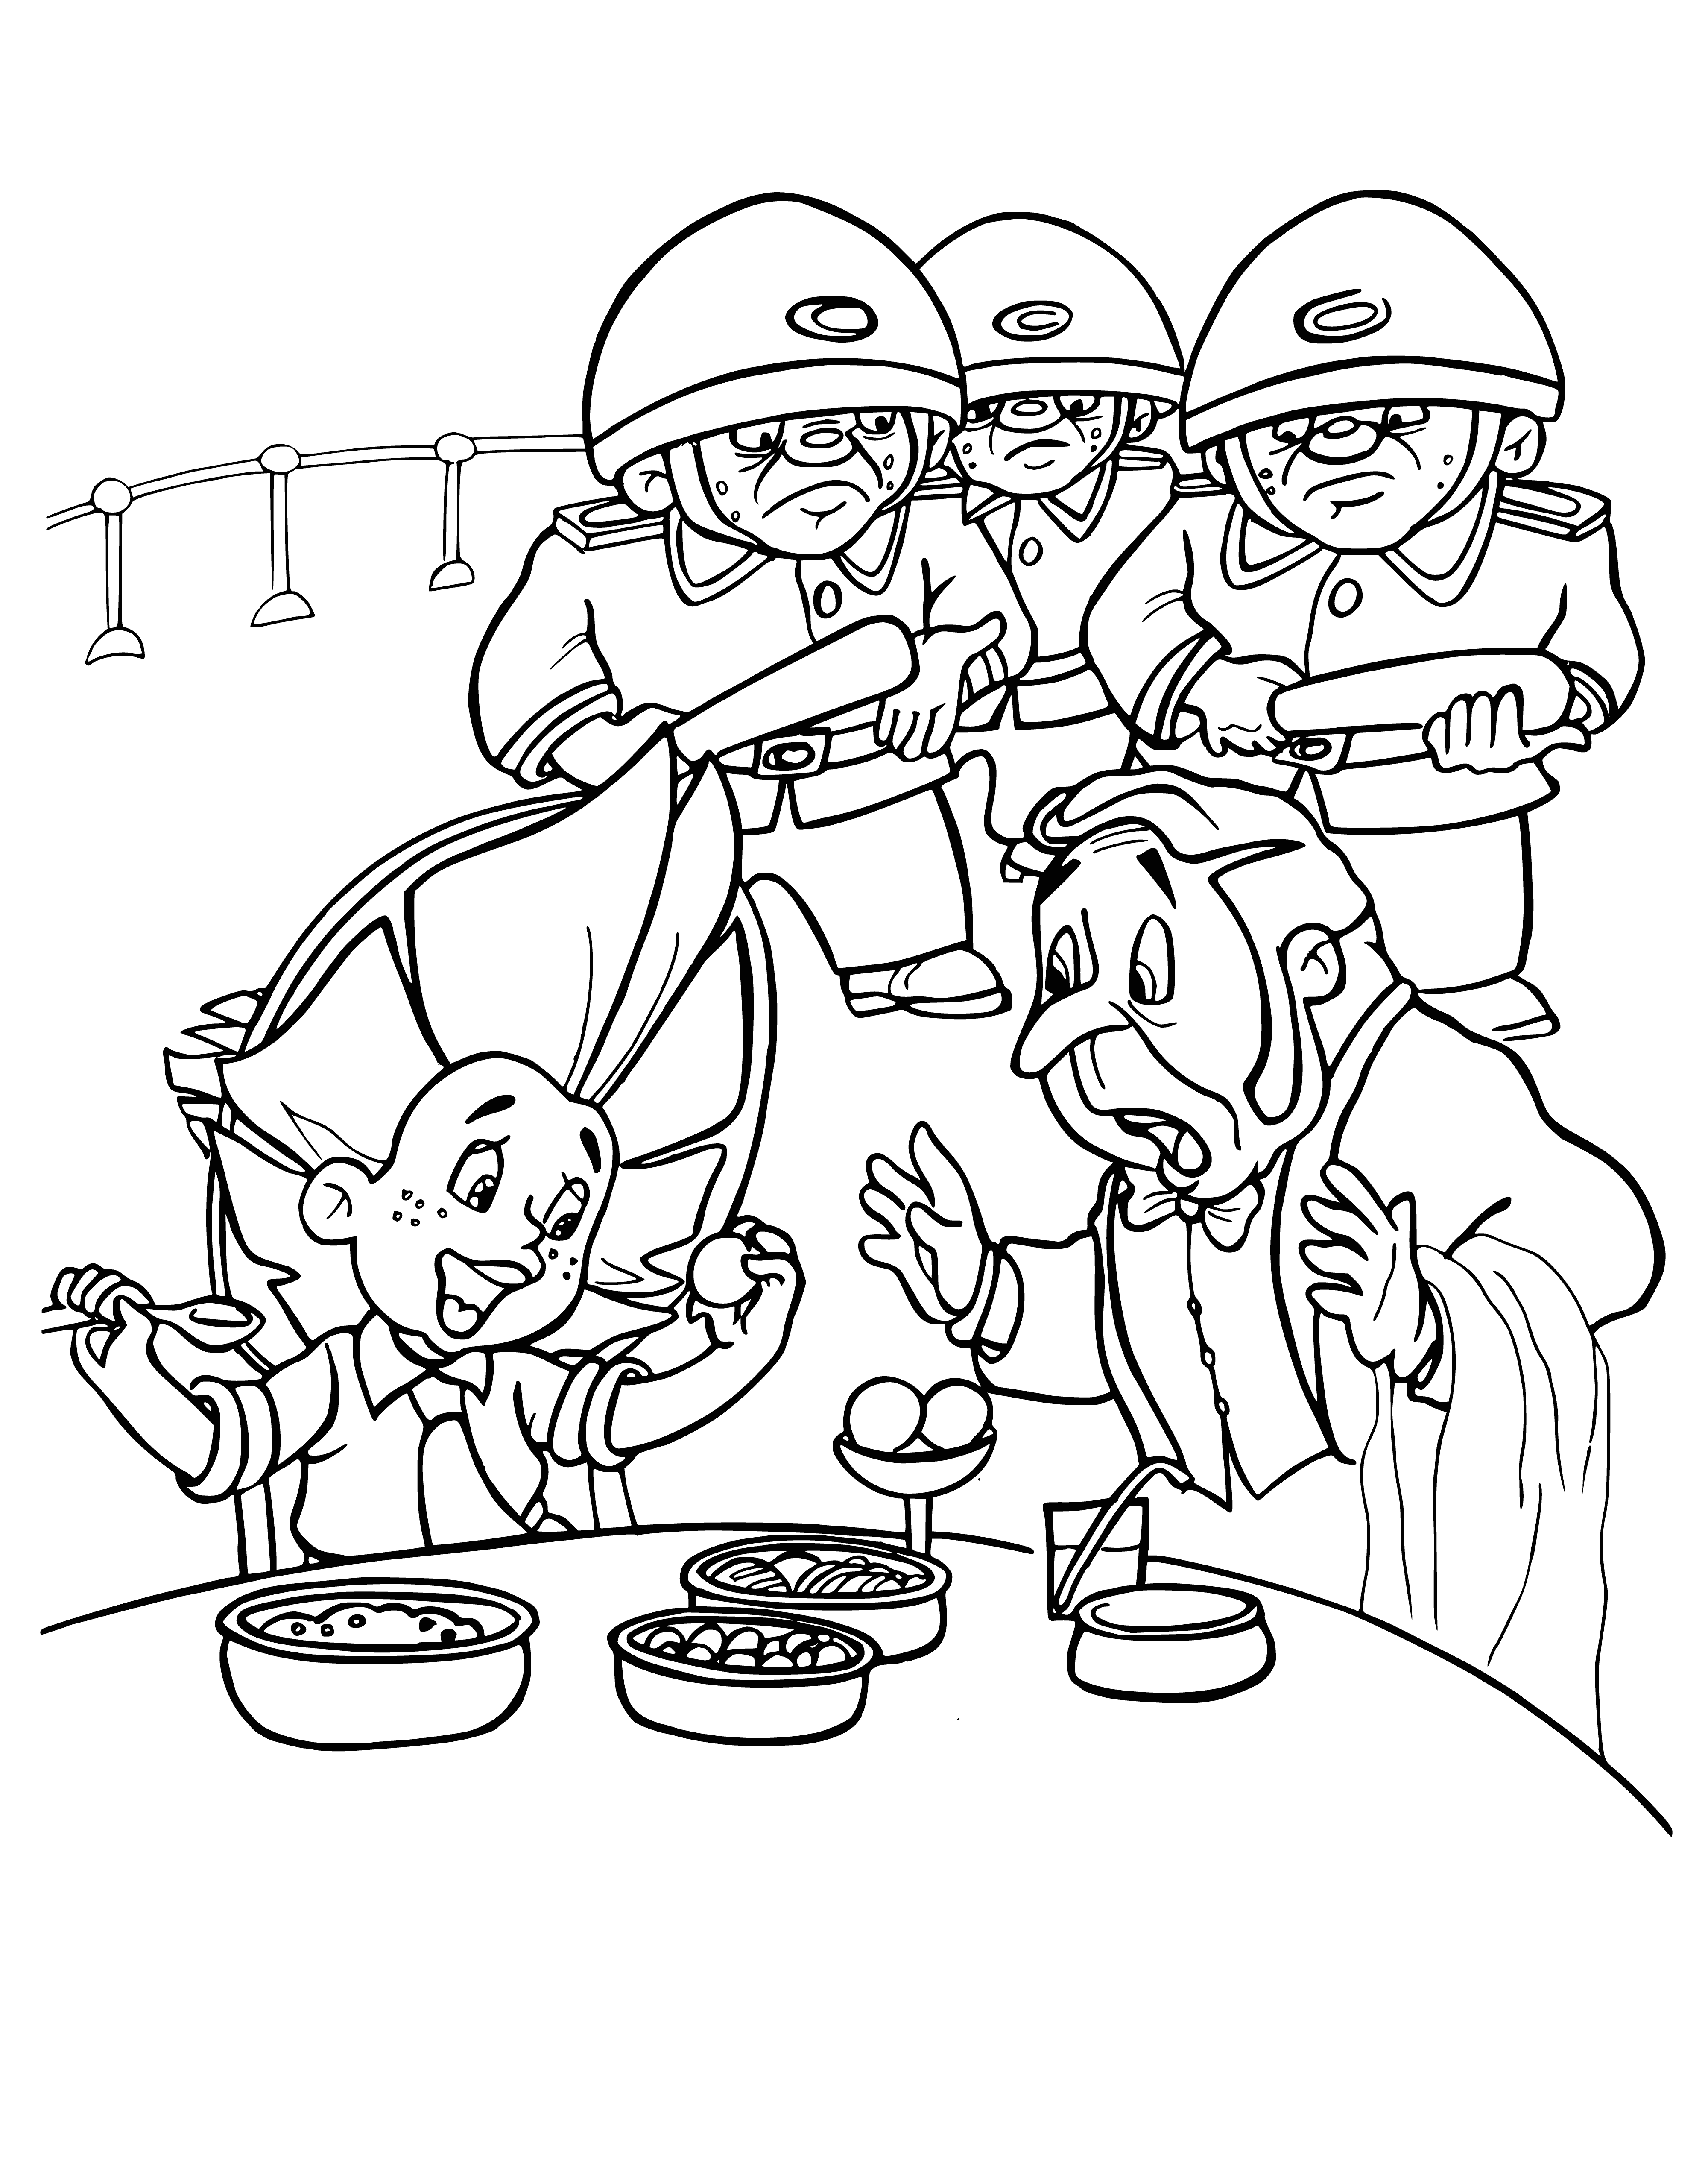 coloring page: Dunno sits on the Moon, eating lunch and drinking from a cup. Food on the plate before him. #LunarLunchBreak